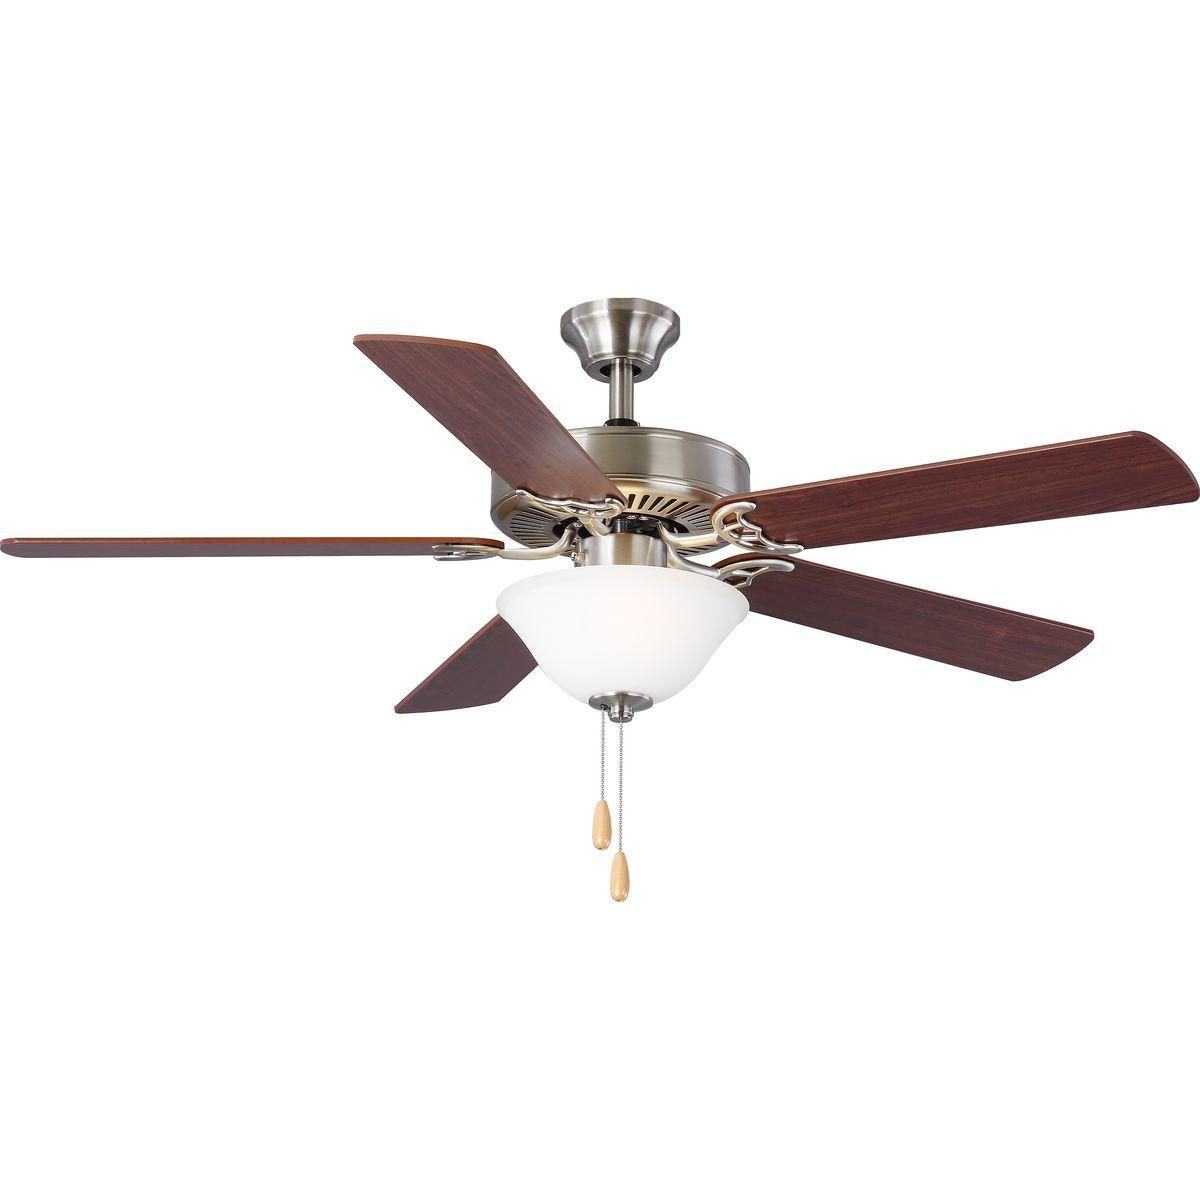 Hubbell P2599-09 A 52 in two-light, five-blade fan with reversible blades and a beautifully crafted white etched glass bowl. Powerful AirPro motor features 3-speed control that can also be reversed to provide year-round comfort. Two medium-based LED lamps are included (no